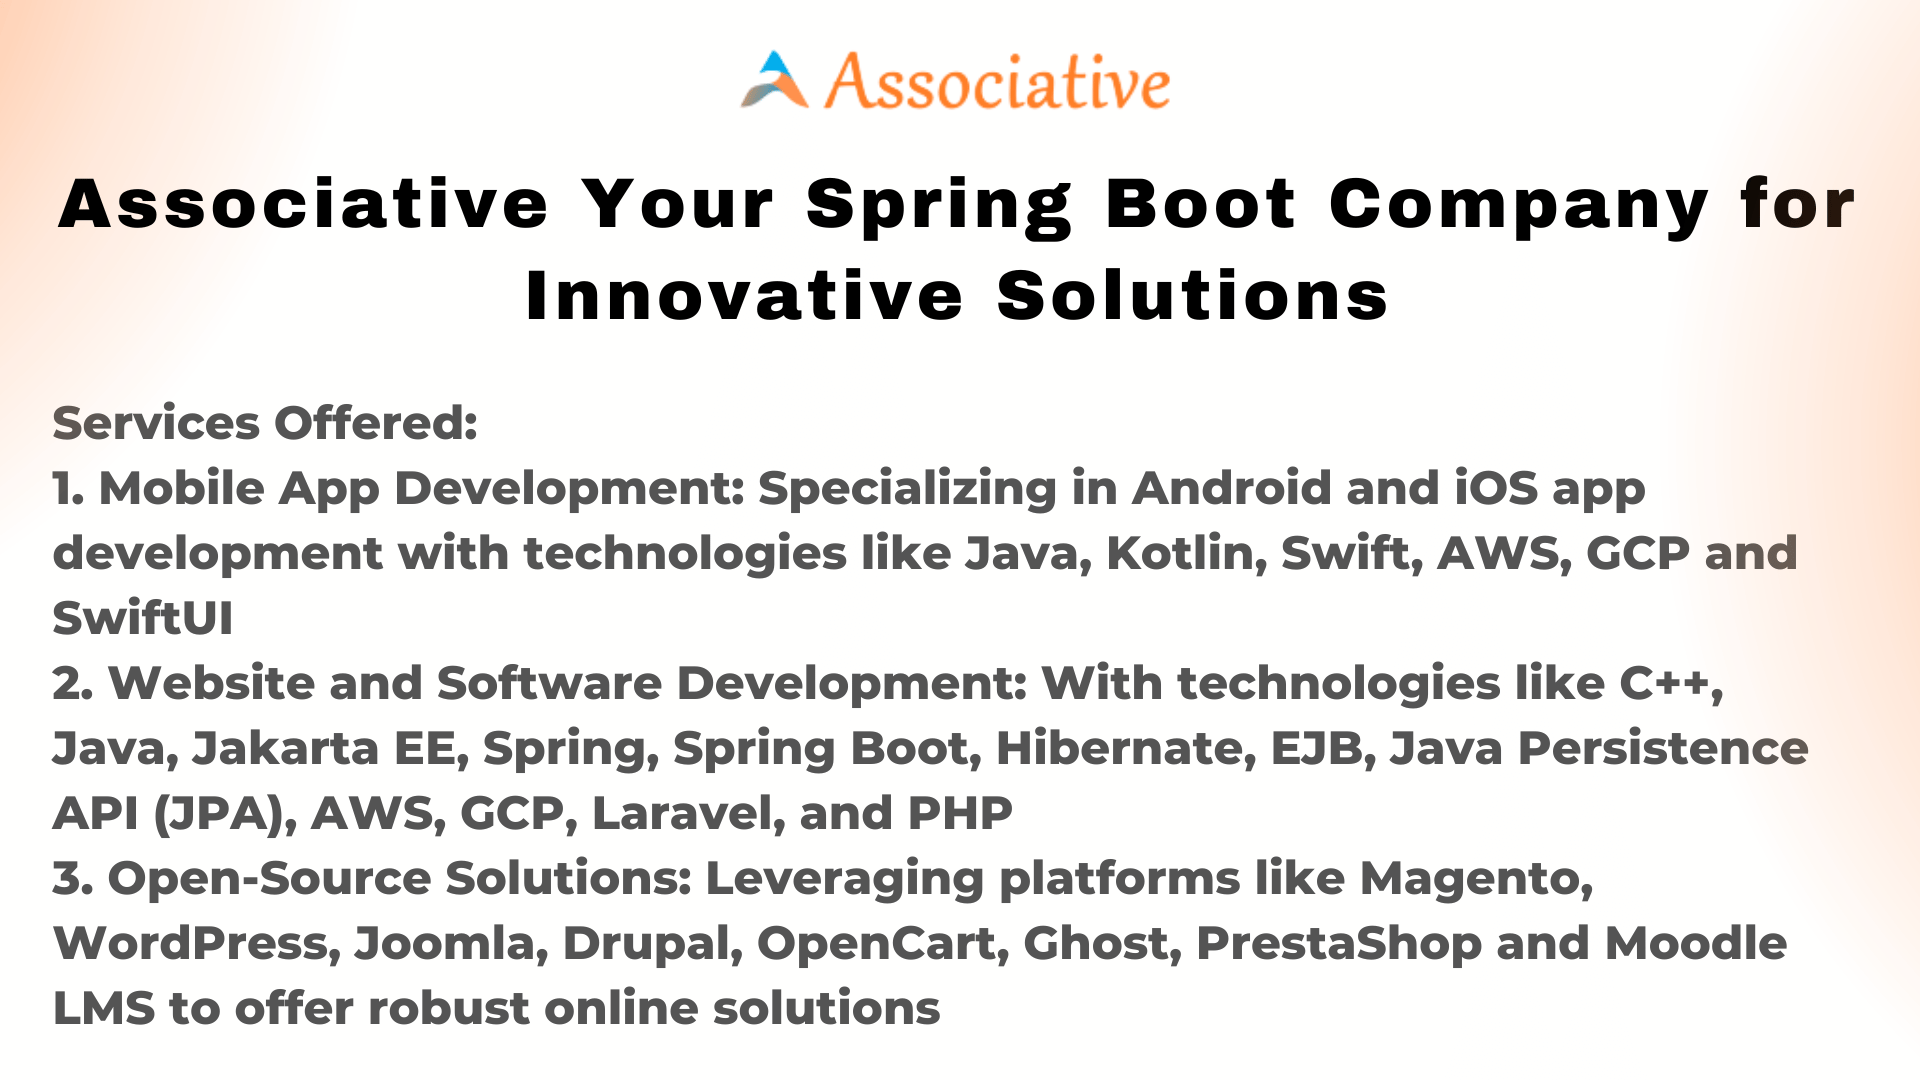 Associative Your Spring Boot Company for Innovative Solutions